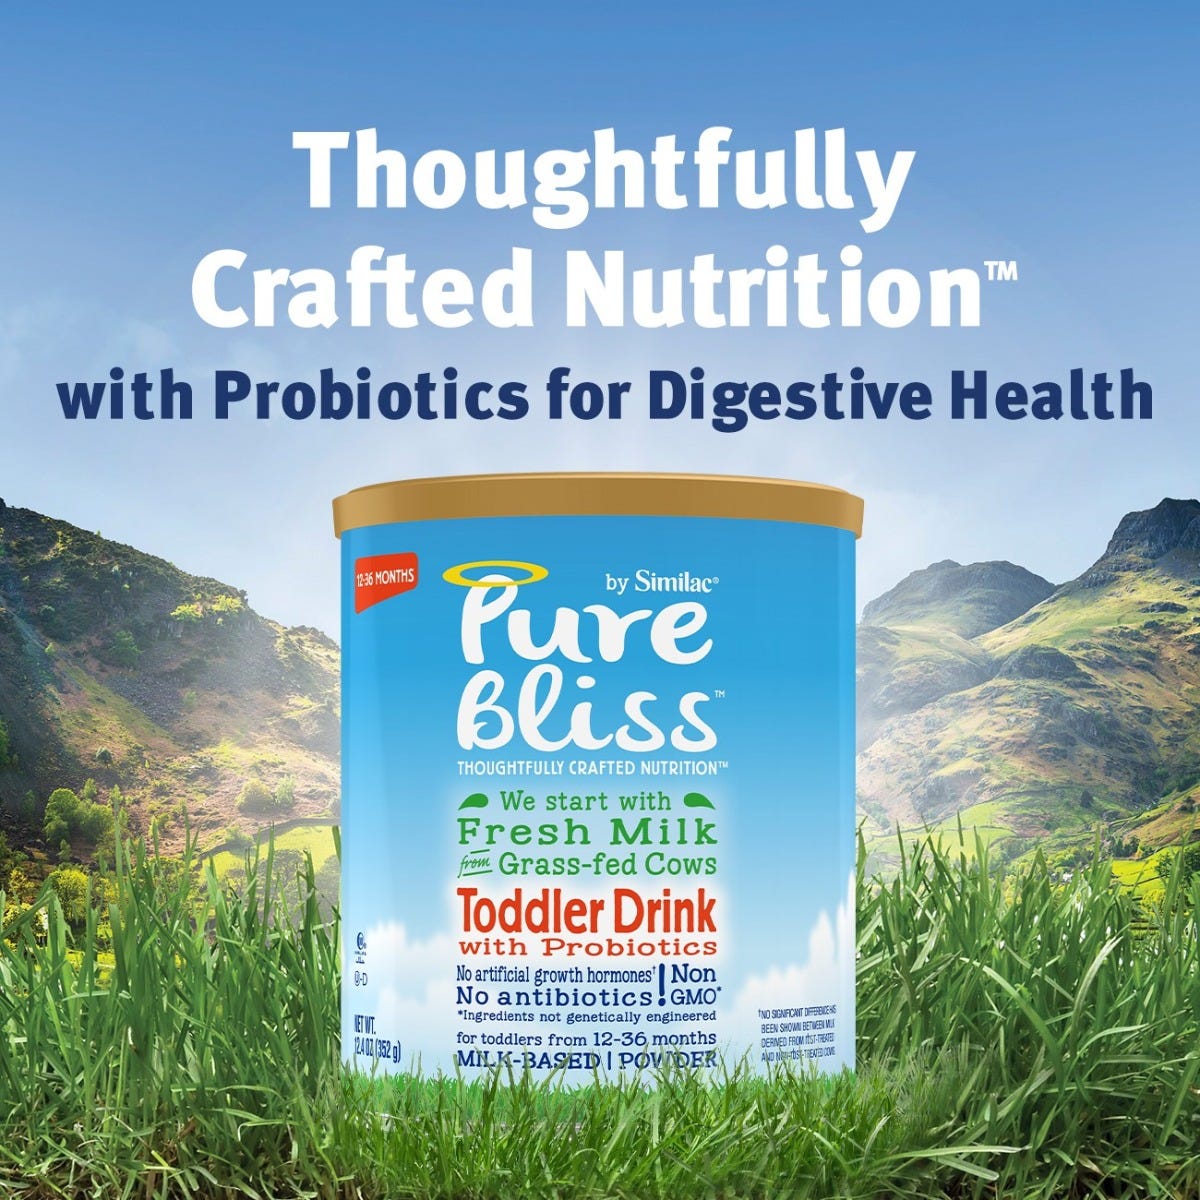 Pure Bliss by Similac Toddler Drink with Probiotics / 24.7 oz can / 67319e